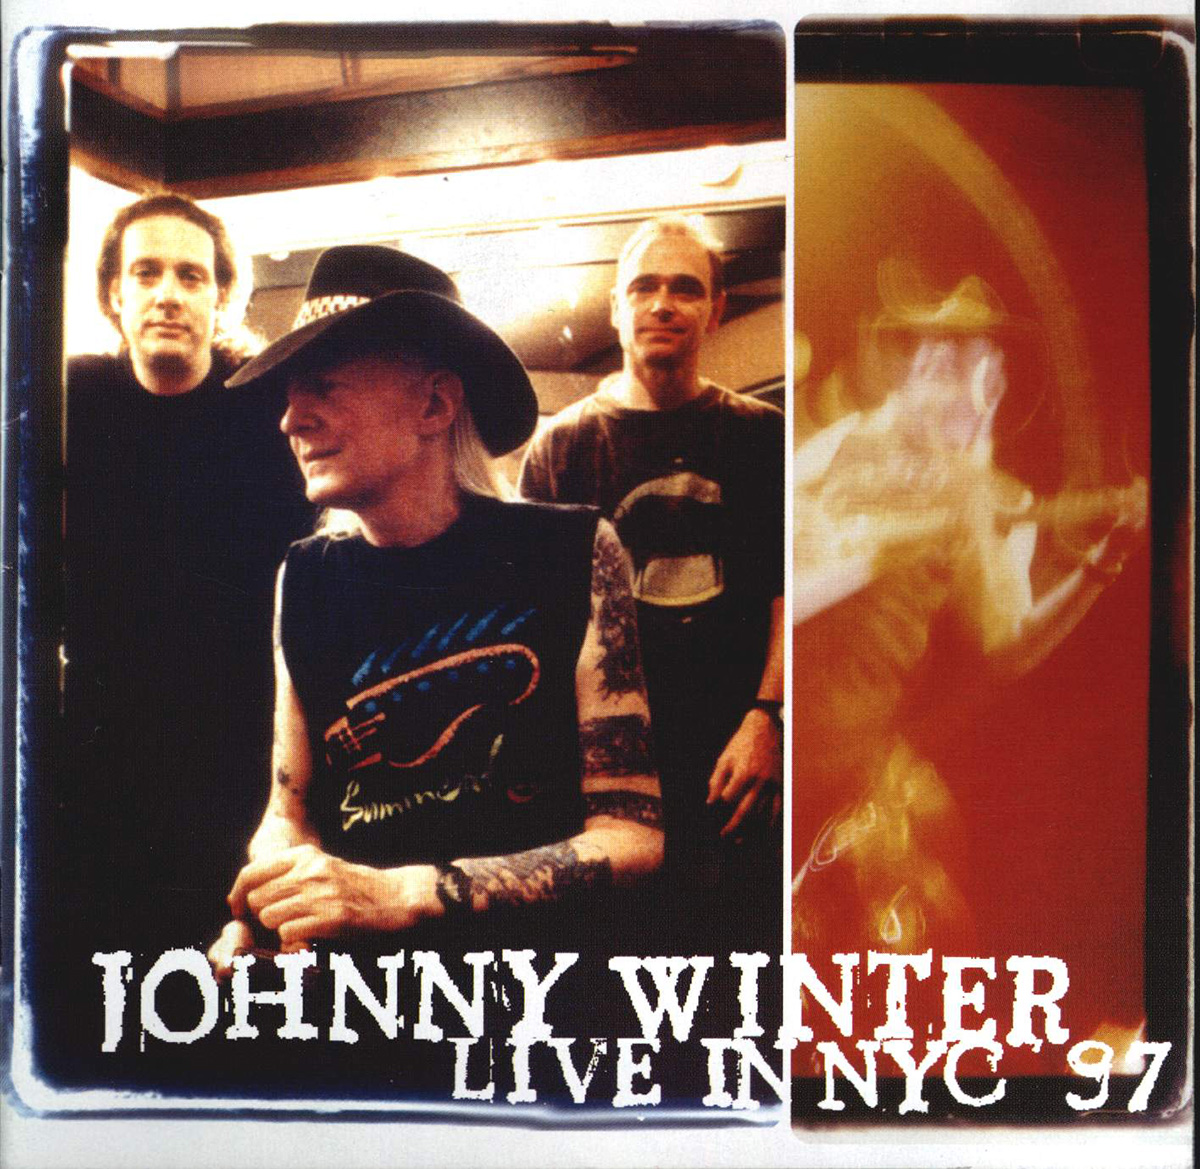 Album Front Cover Photo of JOHNNY WINTER - Live in NYC 1997